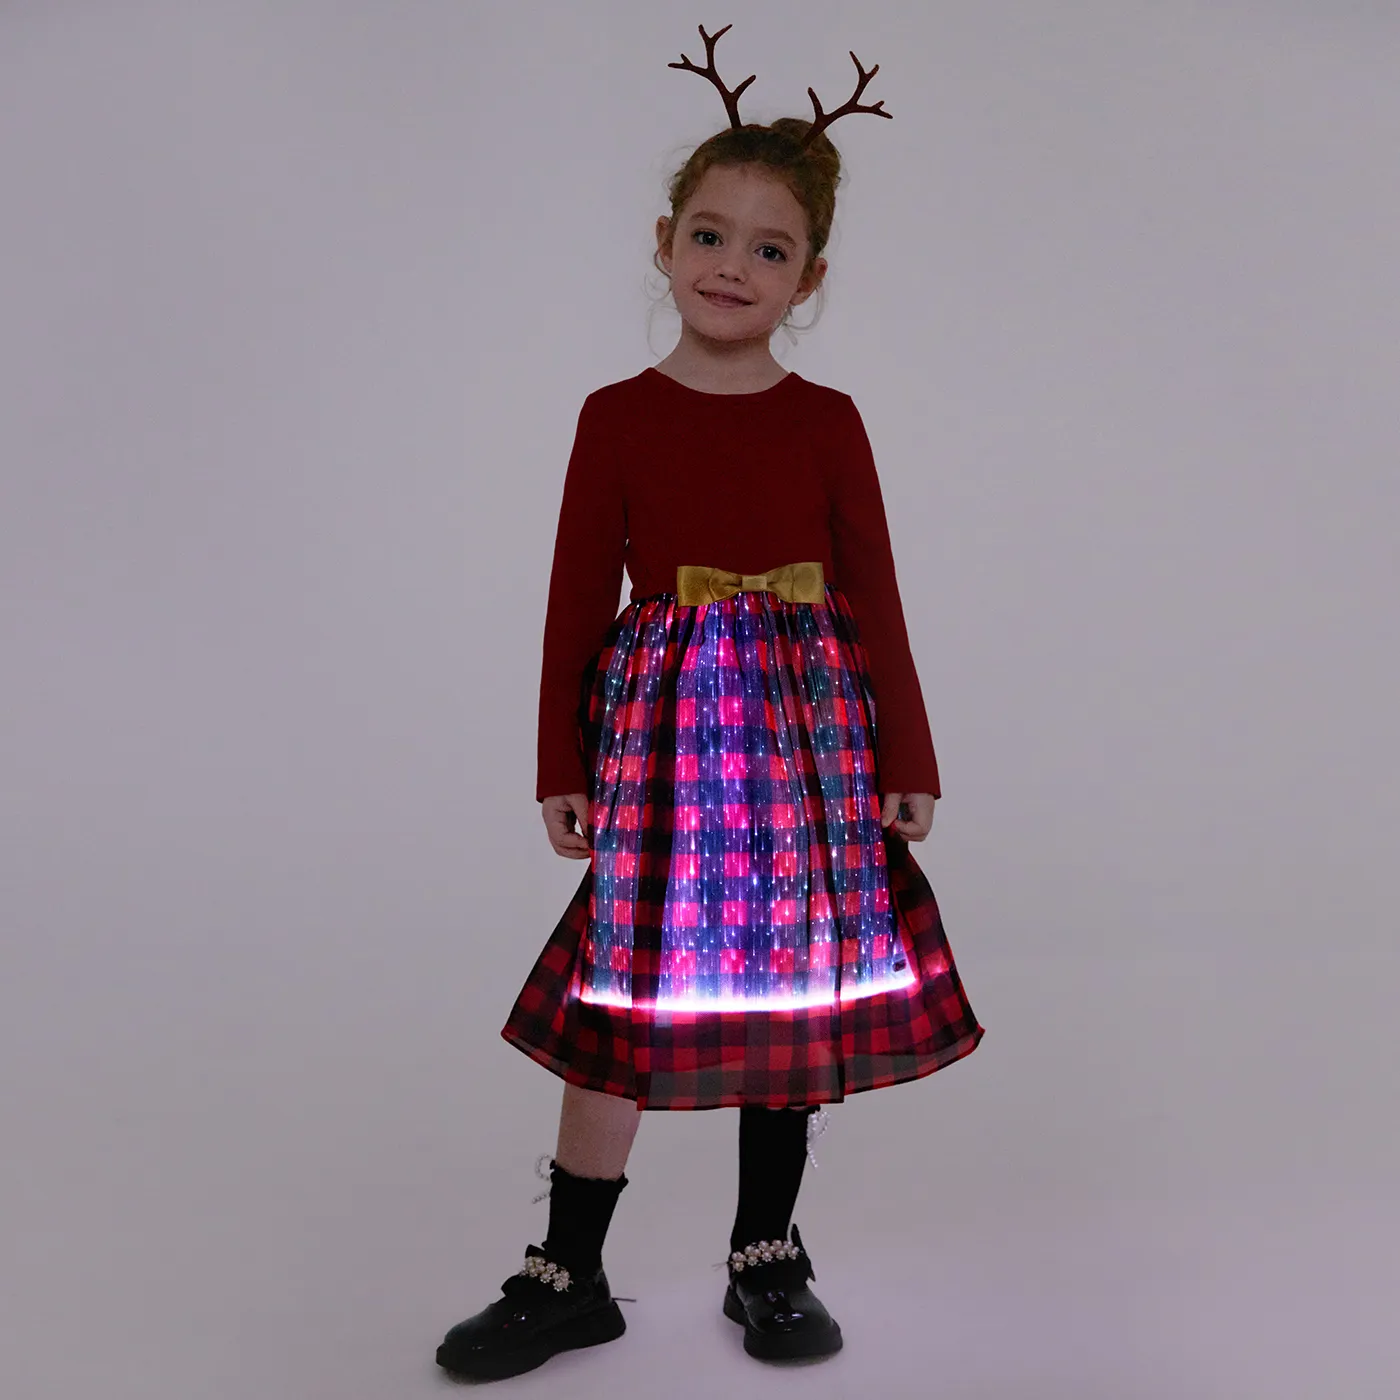 go-glow christmas illuminating dress with light up skirt with checkered pattern including controller (built-in battery)